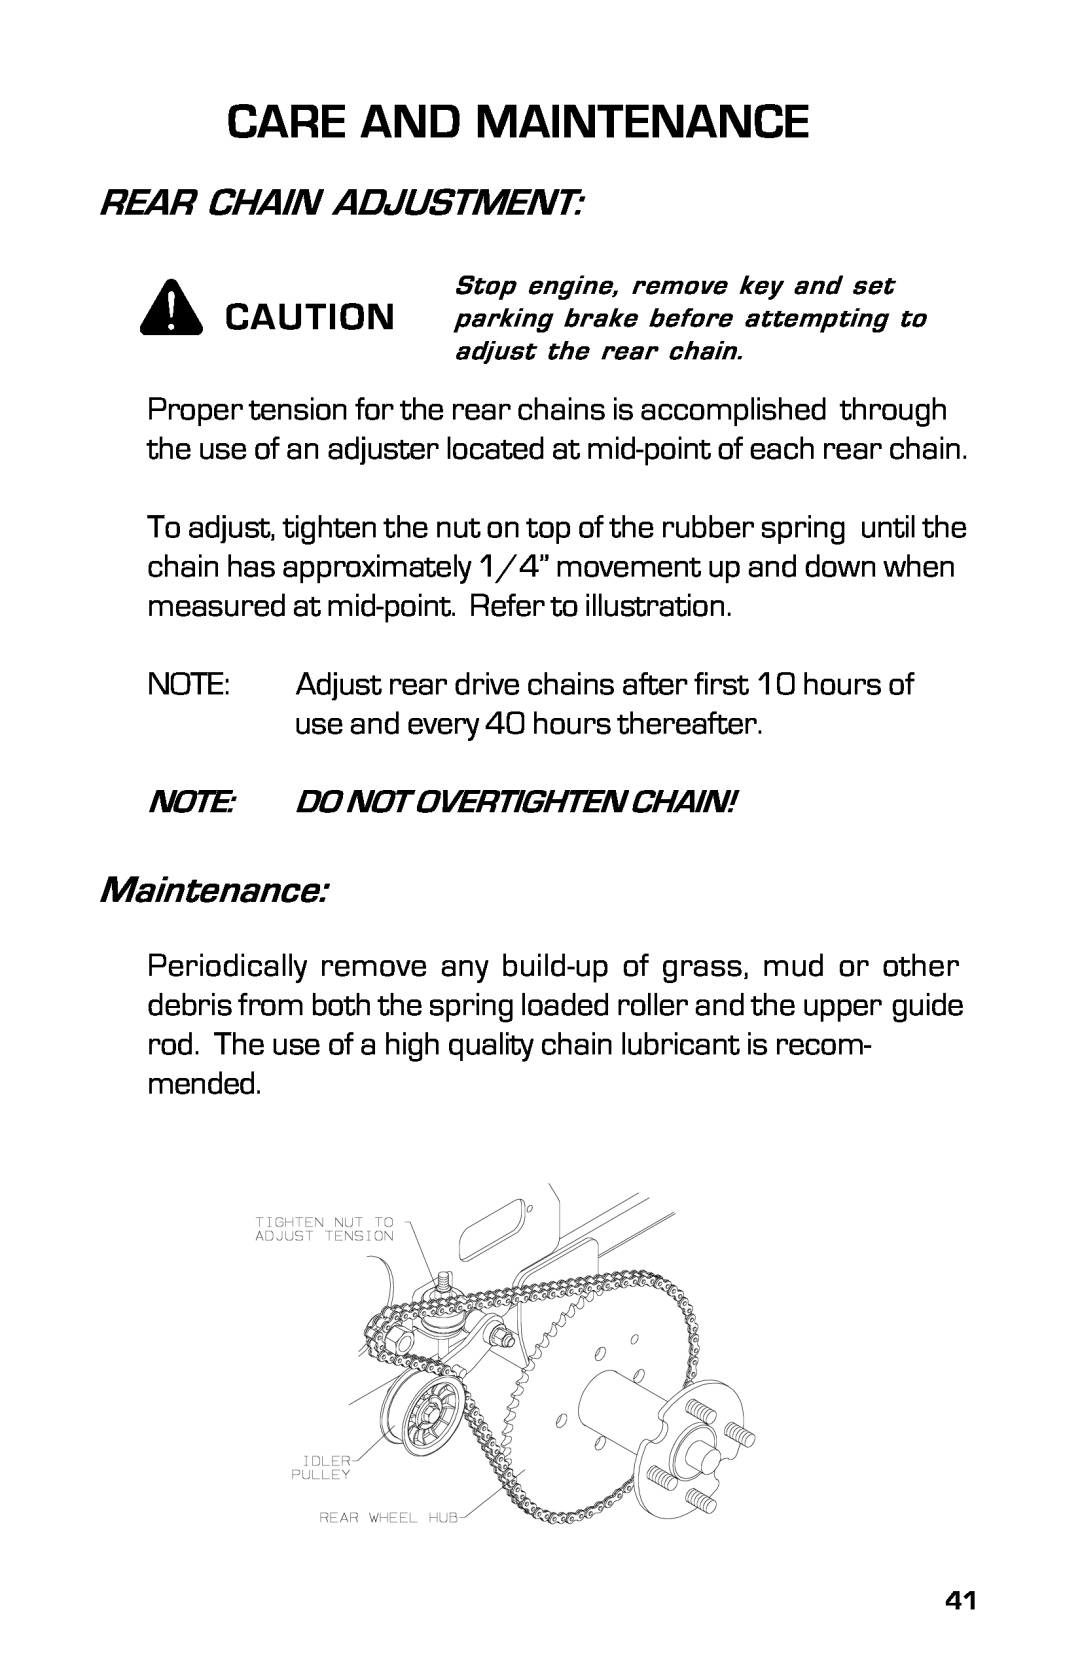 Dixon 2004 manual Rear Chain Adjustment, Care And Maintenance 